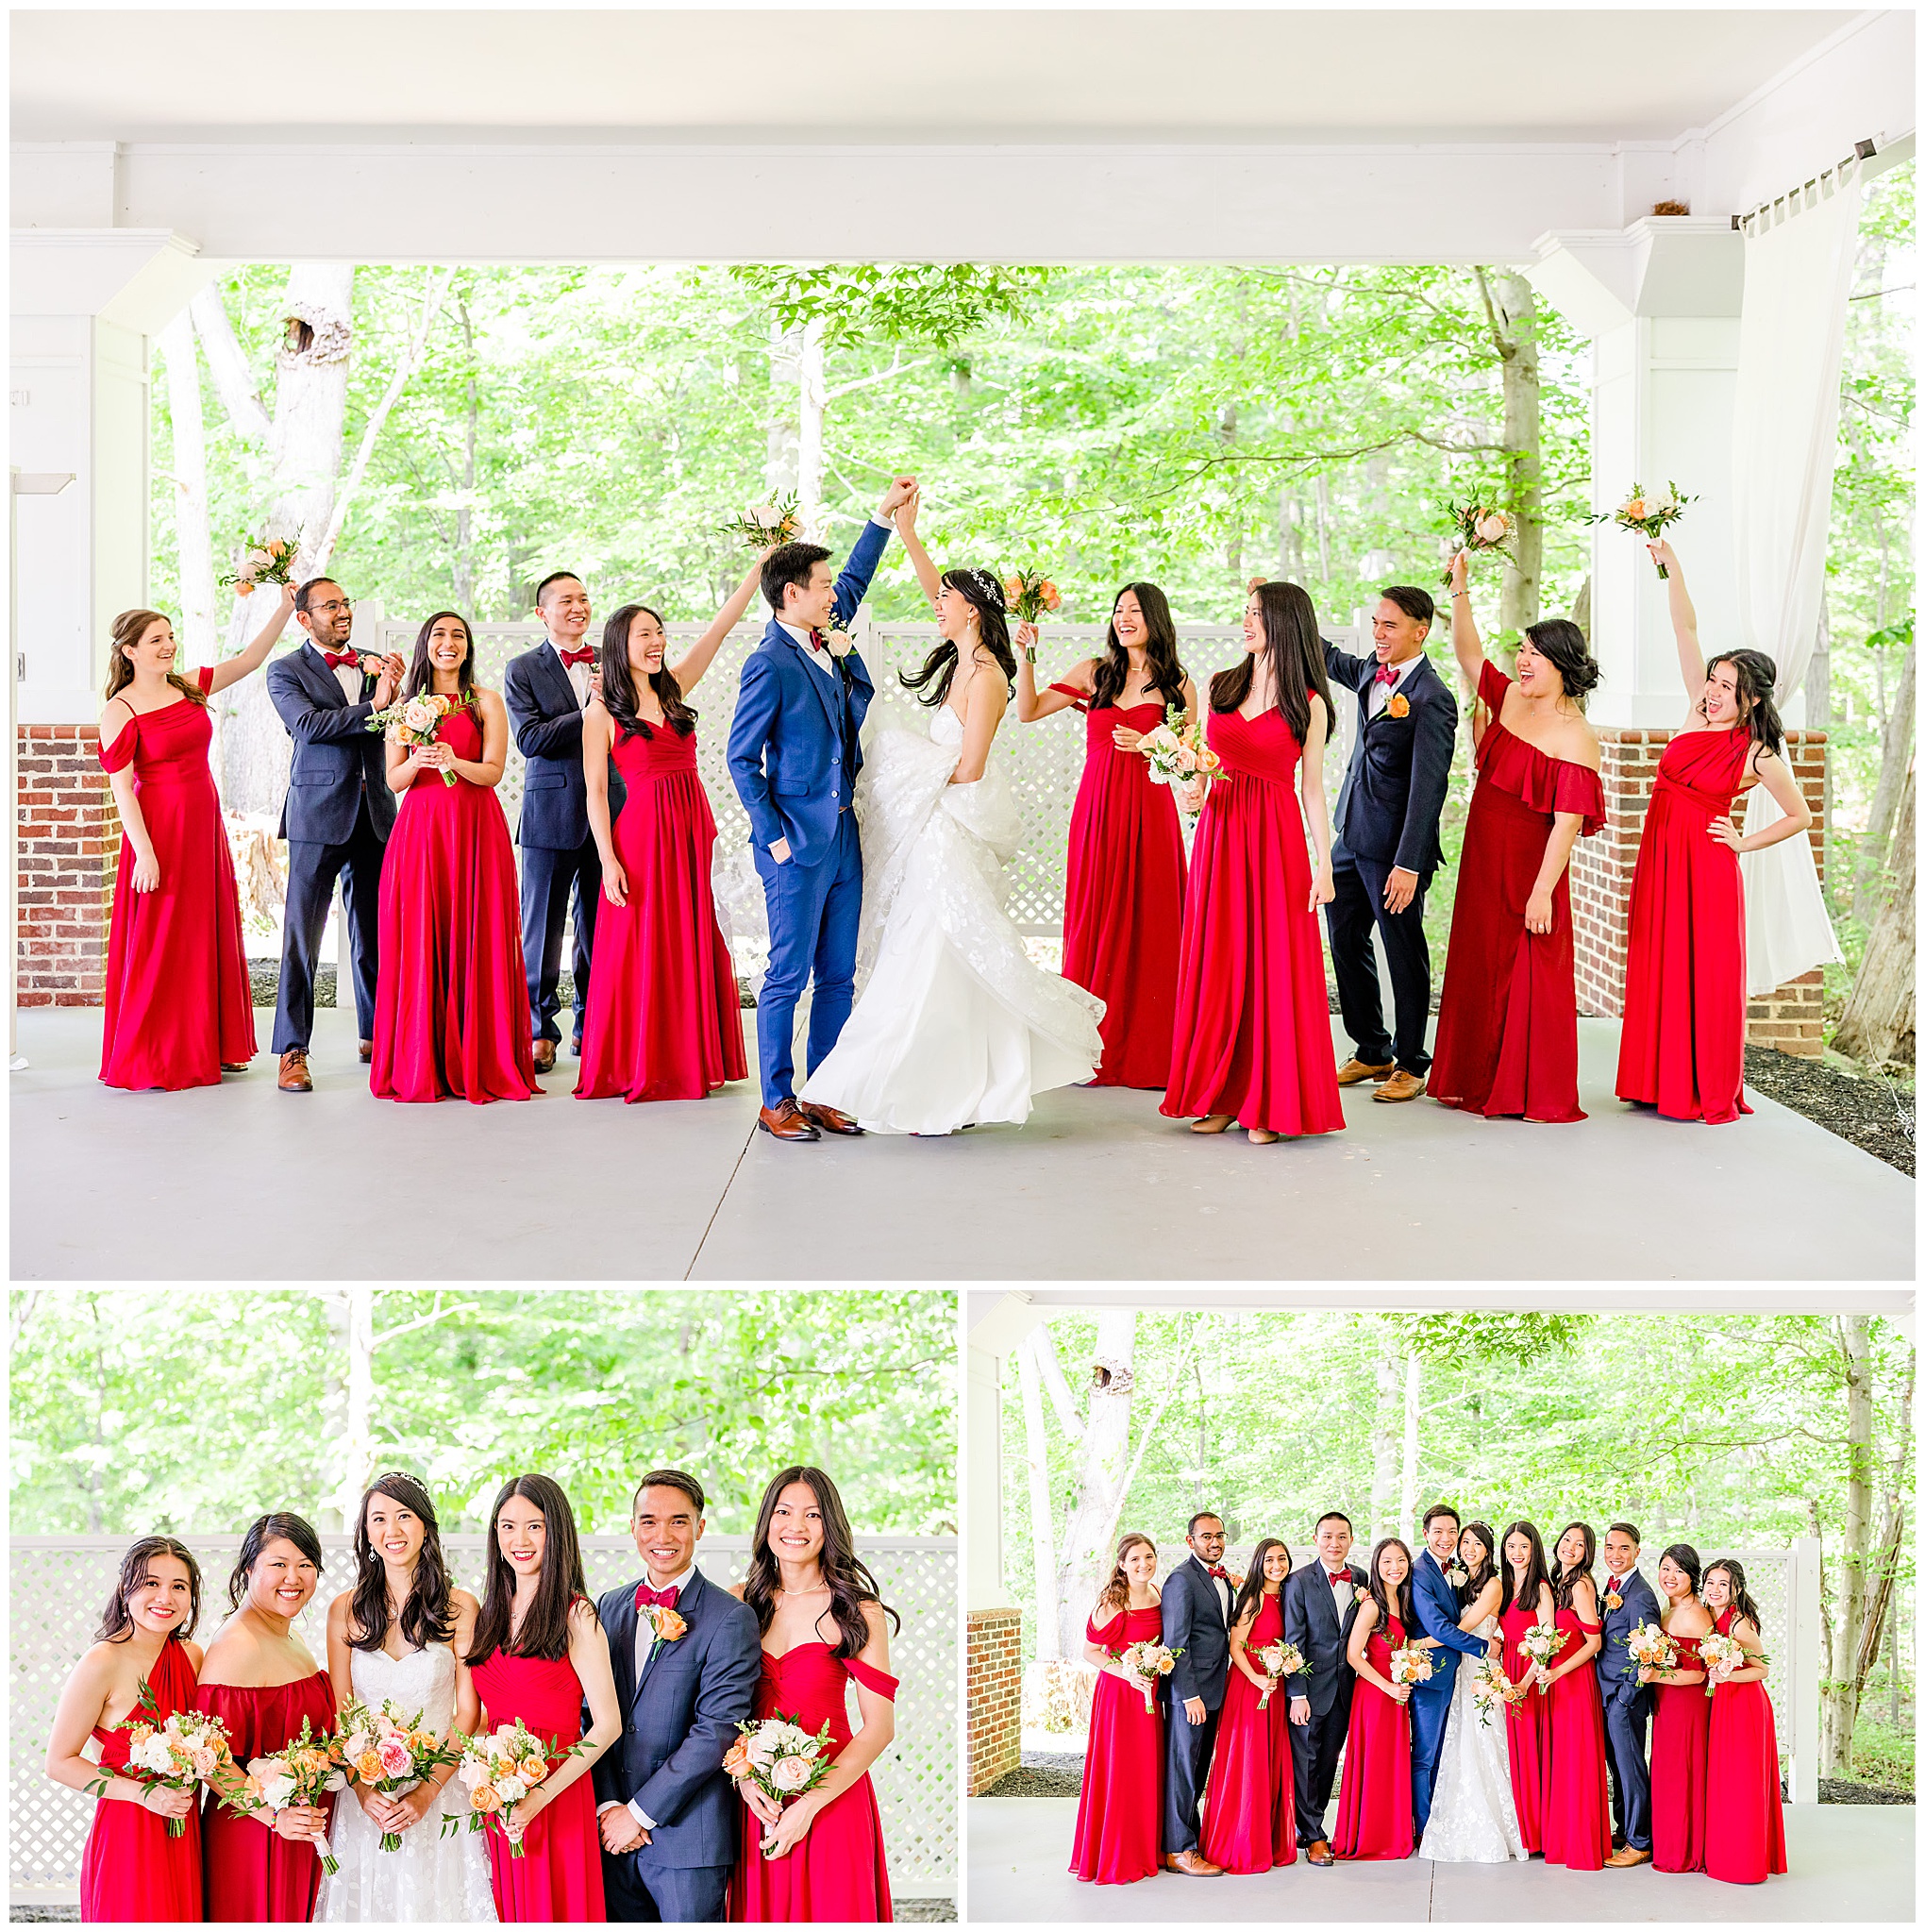 spring Westfields Golf Club wedding, Clifton Virginia wedding, northern Virginia wedding venue, DC wedding photographer, DC photographer, Virginia country club wedding, spring wedding aesthetic, Chinese American wedding, Rachel E.H.Photography, bride and groom celebrating with wedding party, bride with bridesmaids